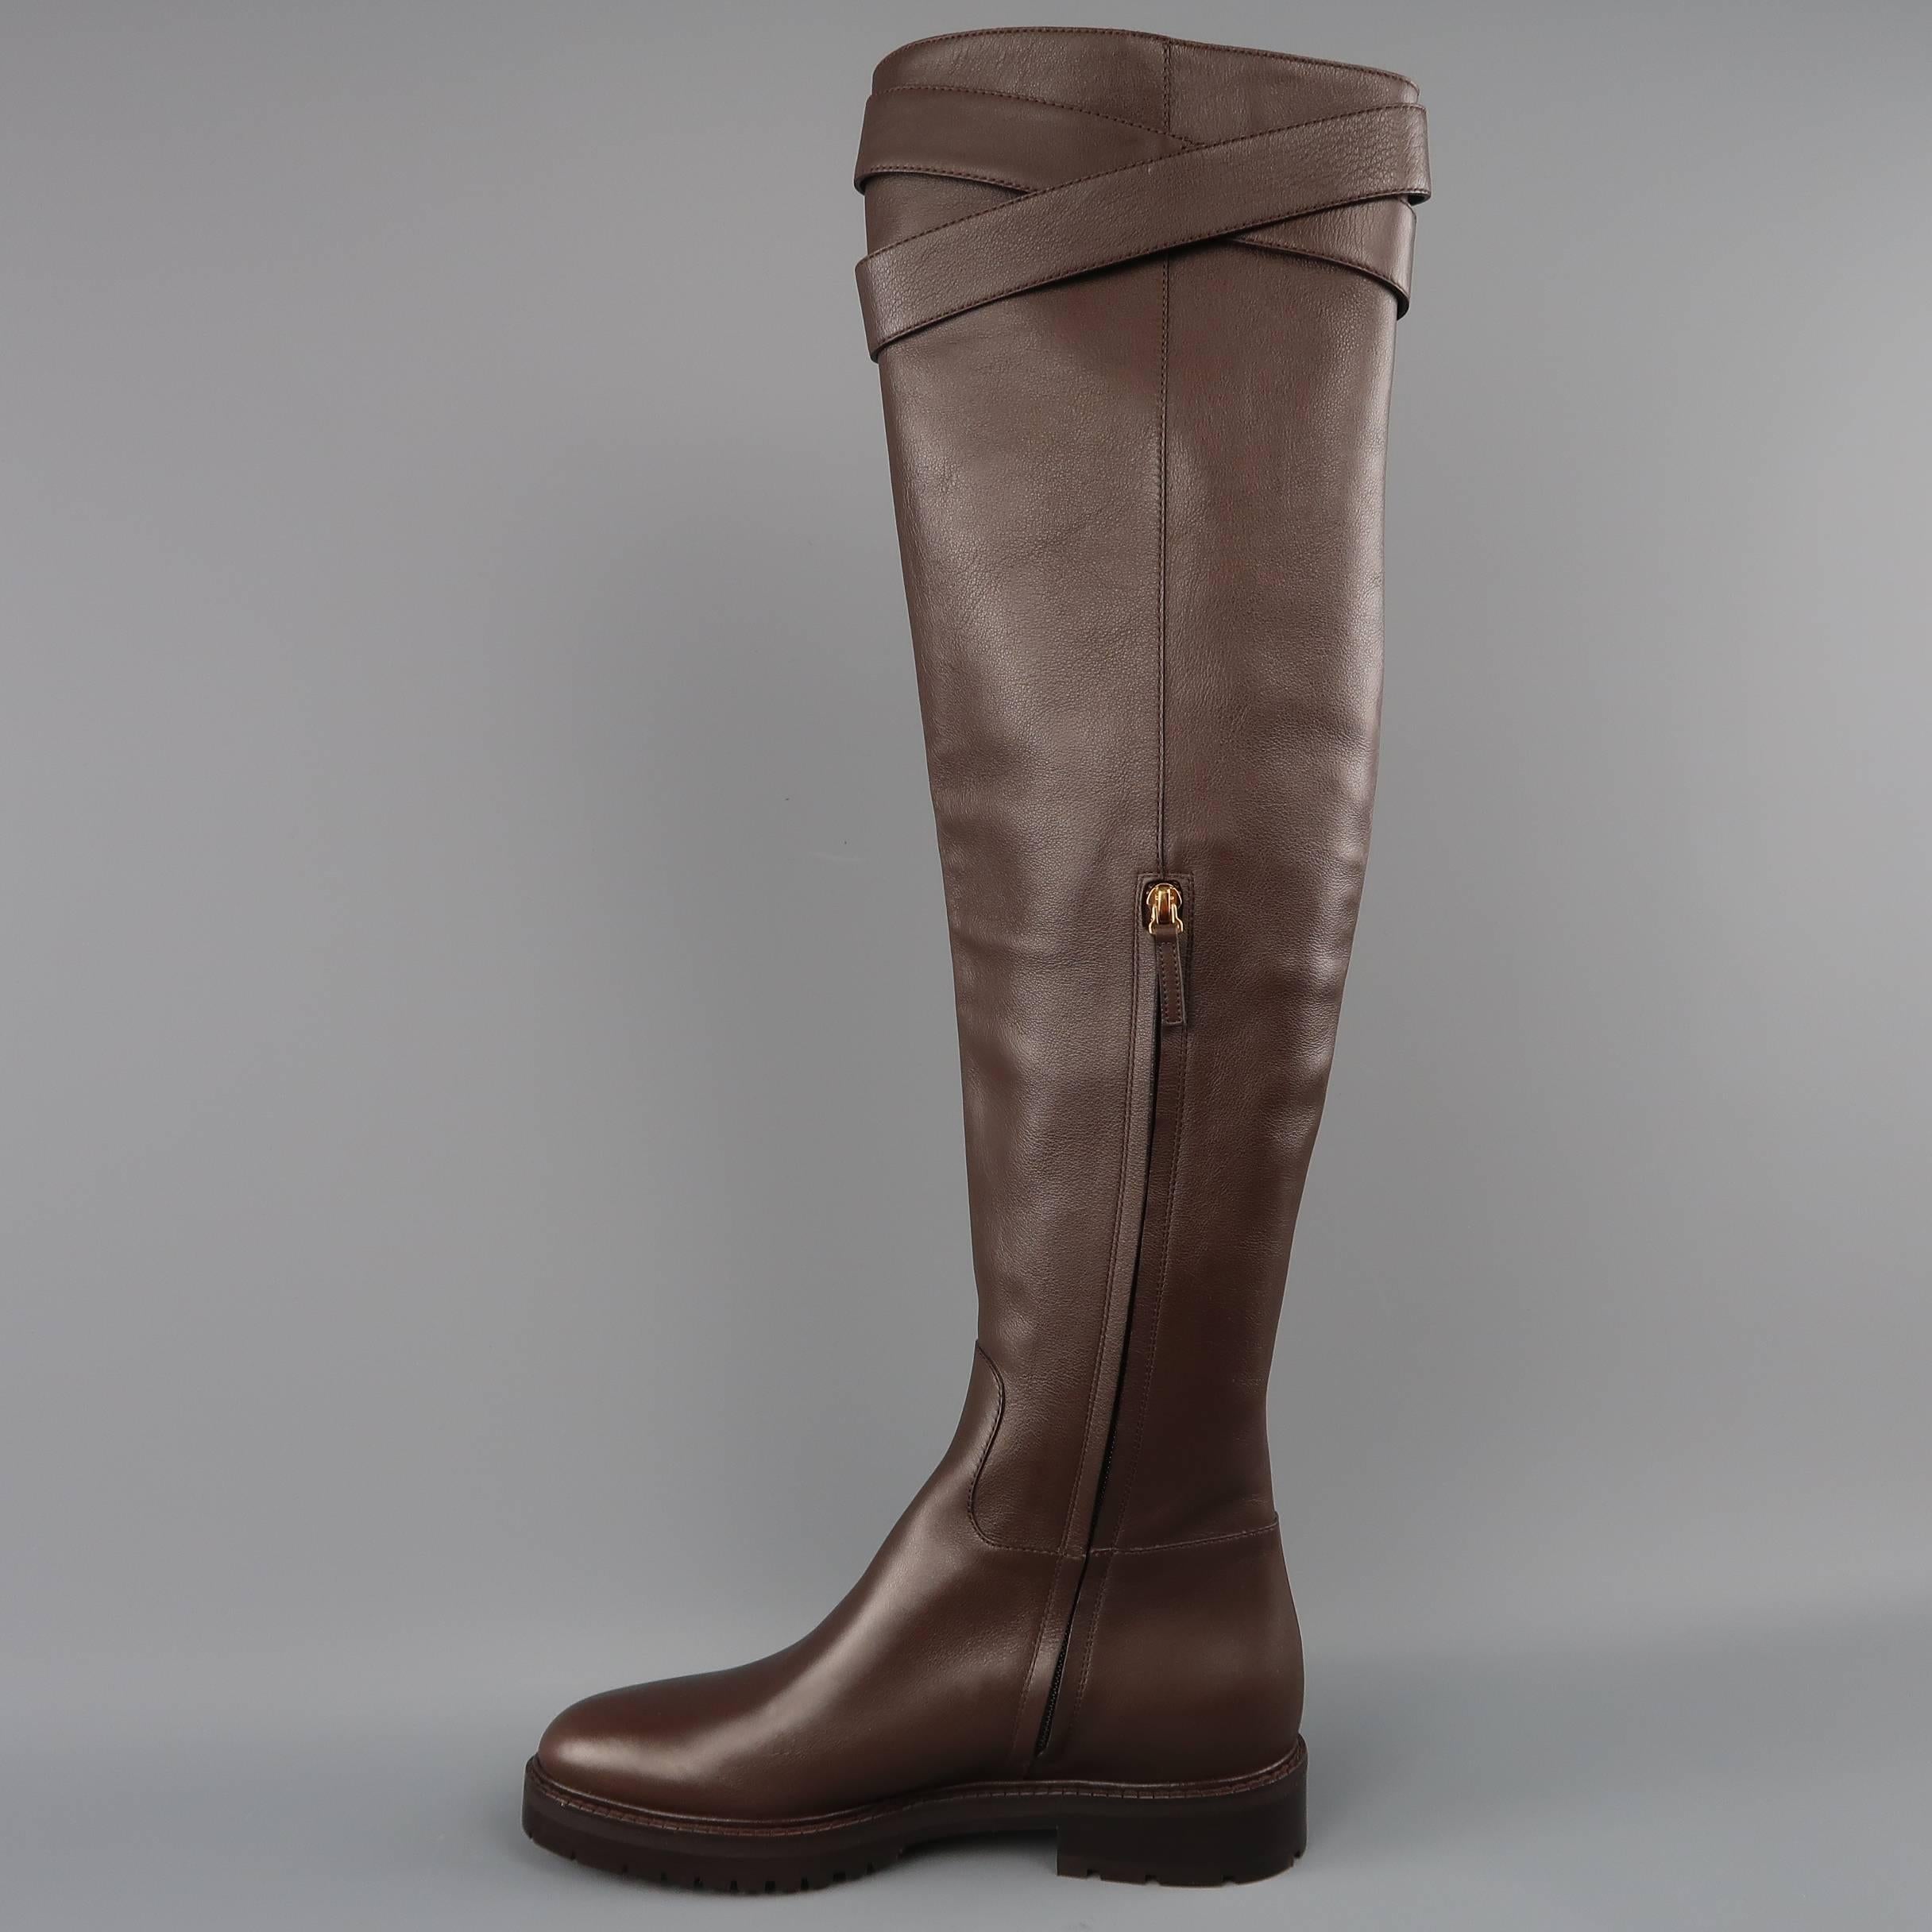 VALENTINO Leather Boots  - Size 8.5 Brown Over the Knee BOWRAP Riding  1